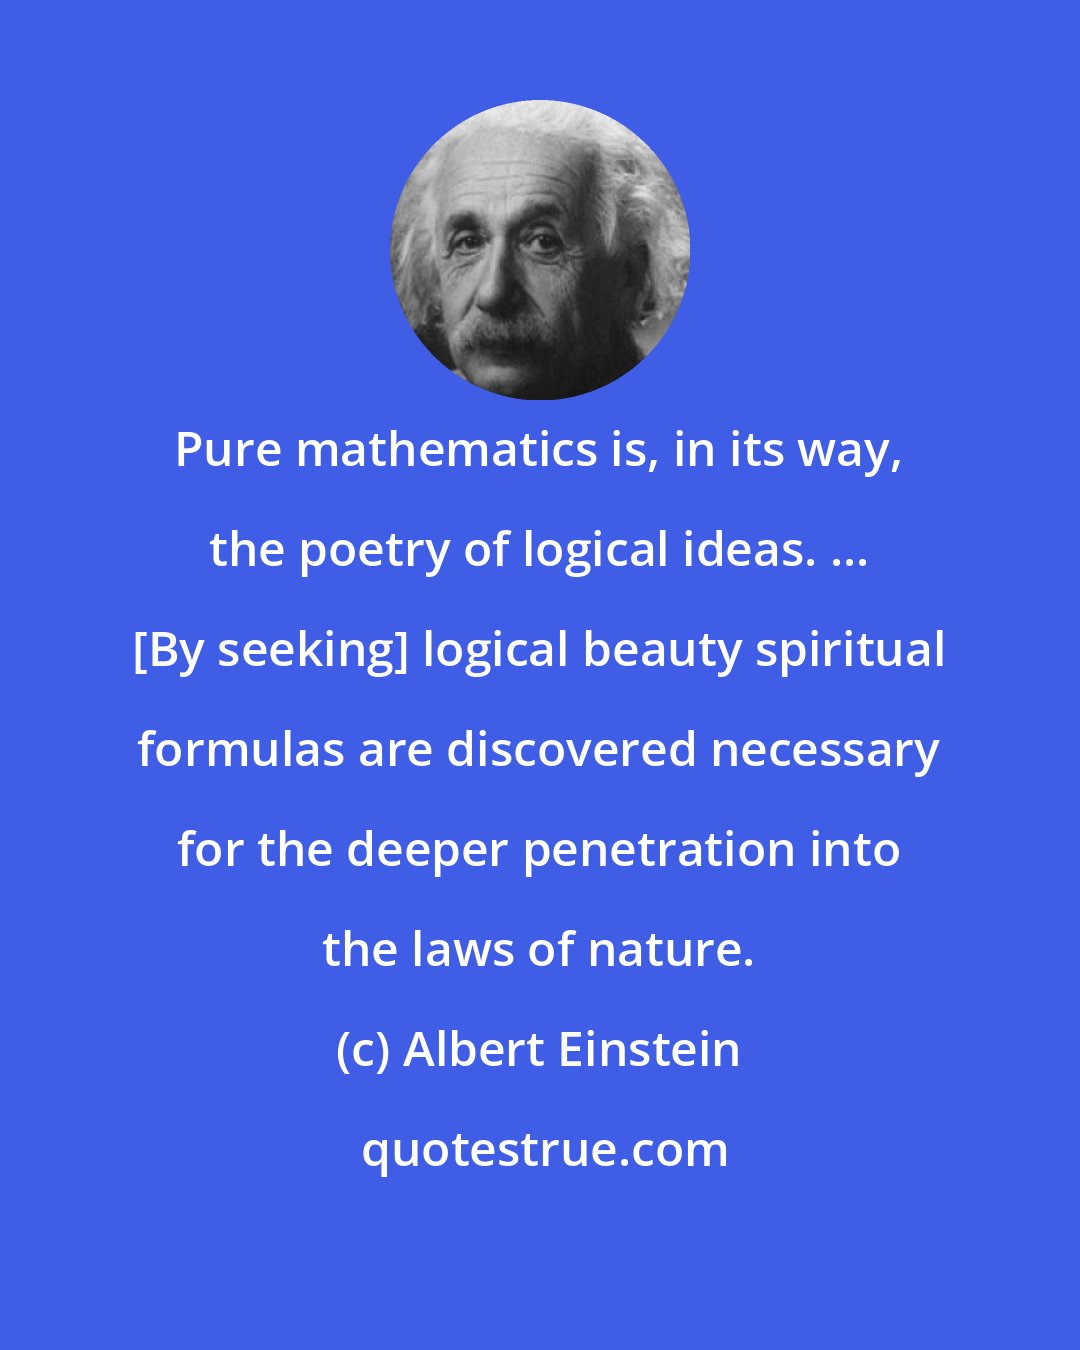 Albert Einstein: Pure mathematics is, in its way, the poetry of logical ideas. ... [By seeking] logical beauty spiritual formulas are discovered necessary for the deeper penetration into the laws of nature.